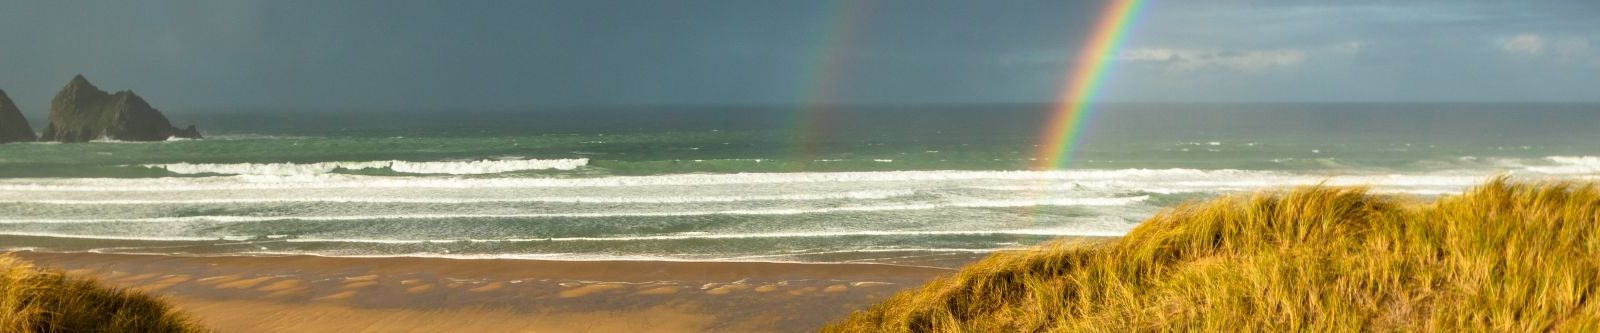 Double rainbow over Holywell bay in winter